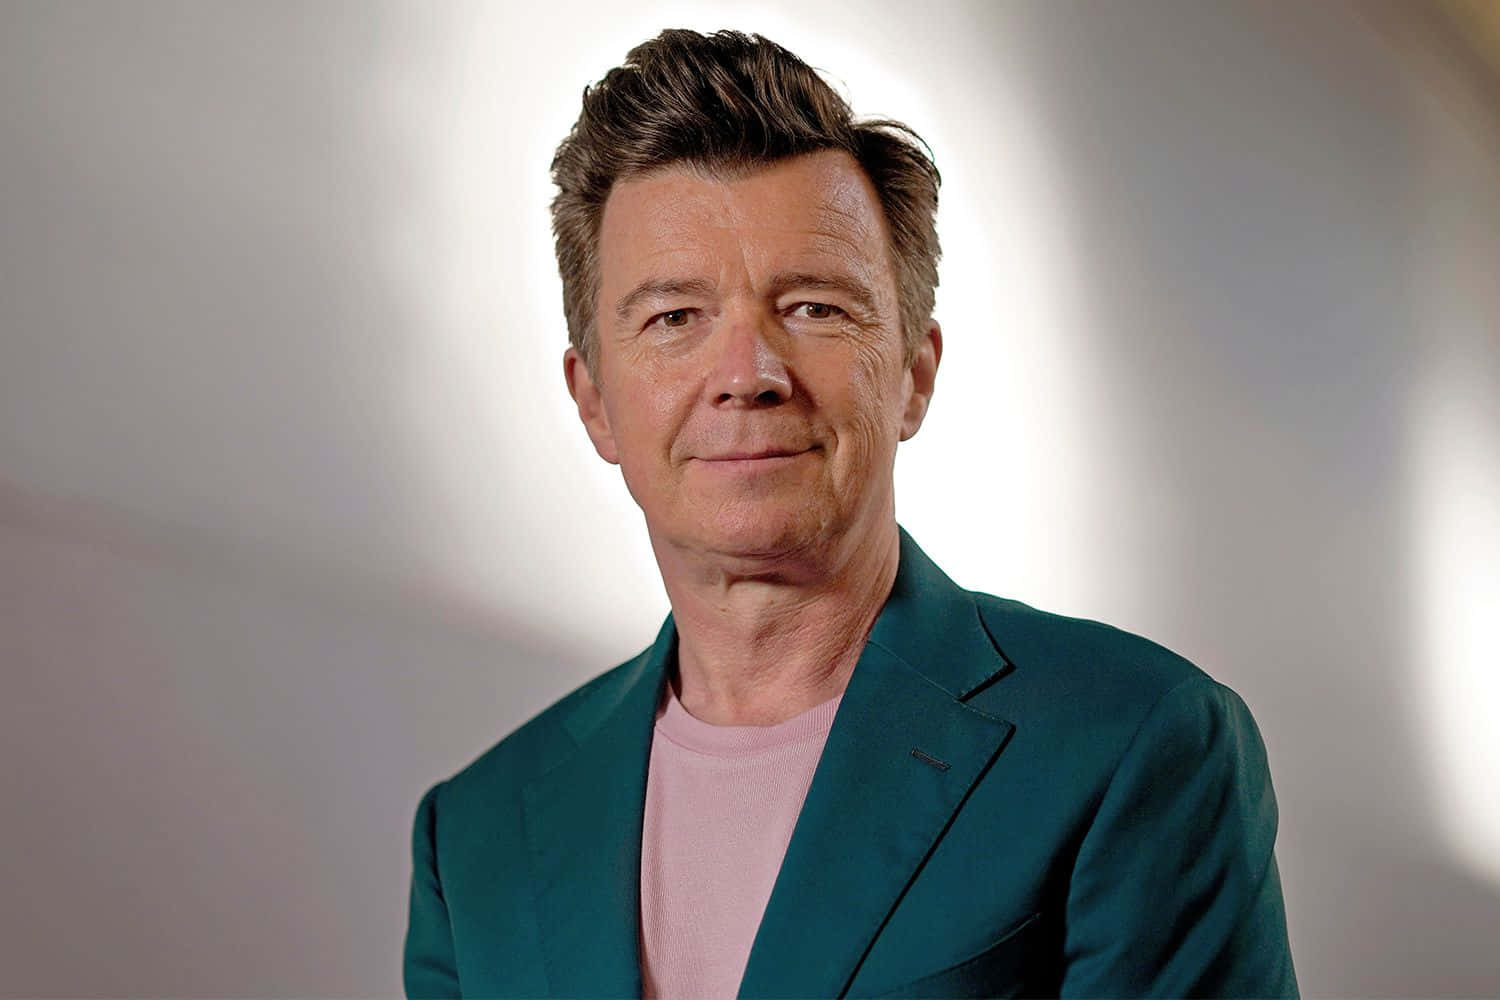 Iconic singer Rick Astley at a performance Wallpaper